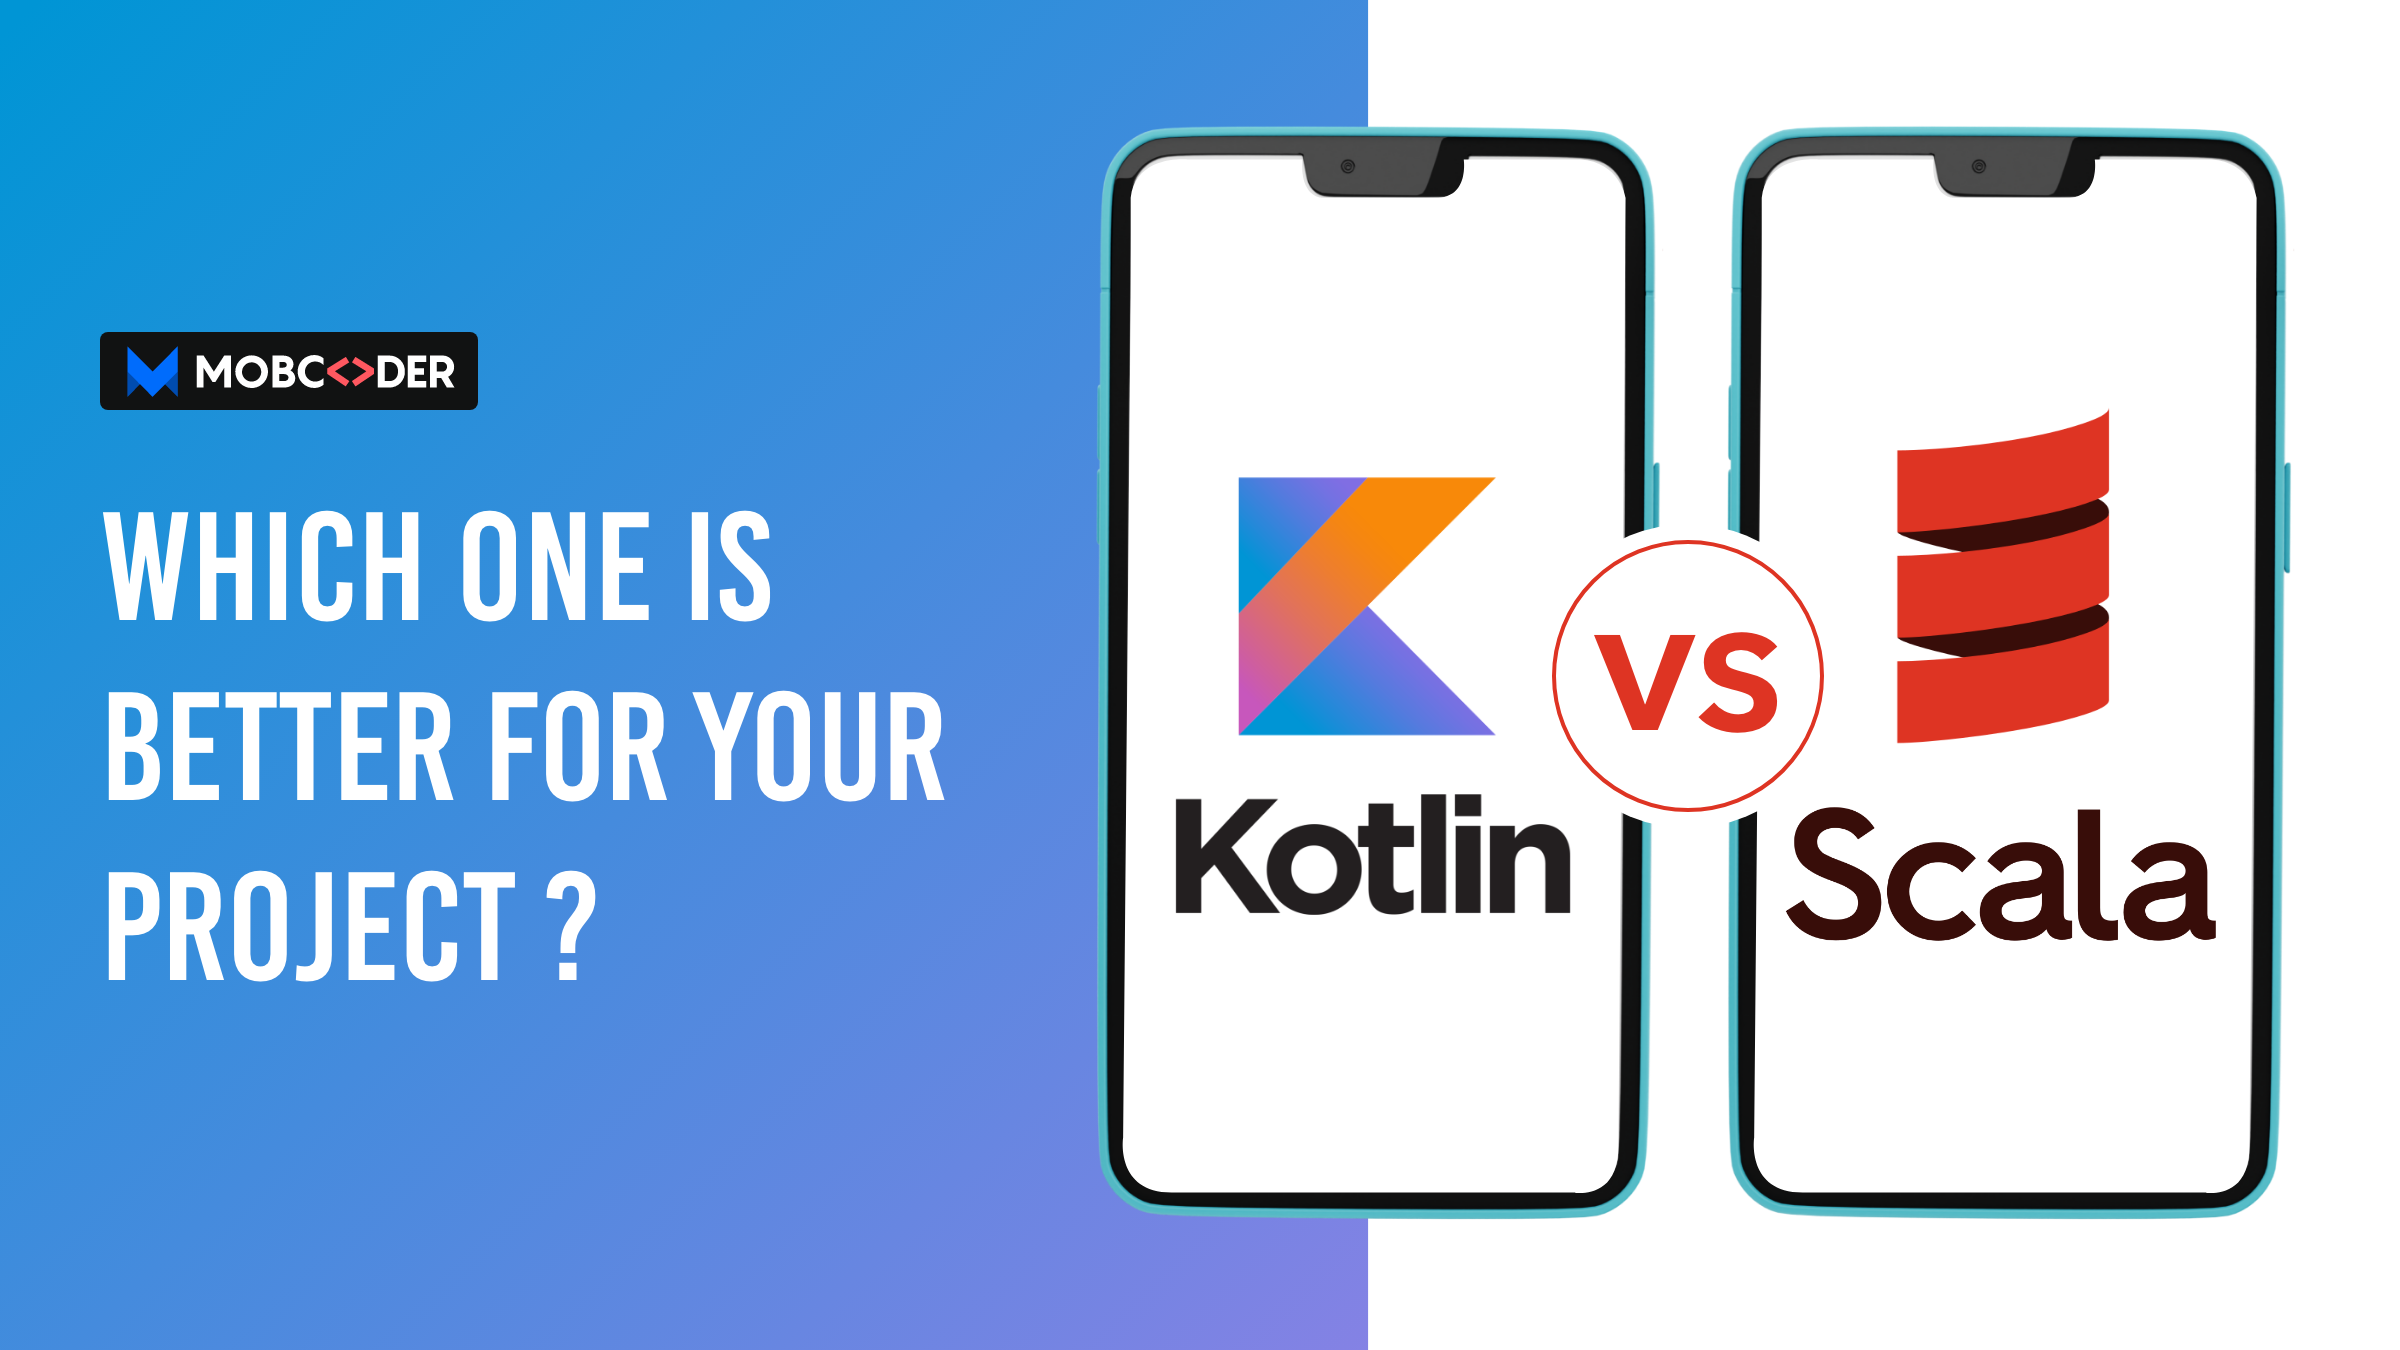 Kotlin vs Scala: Which one is better for your project